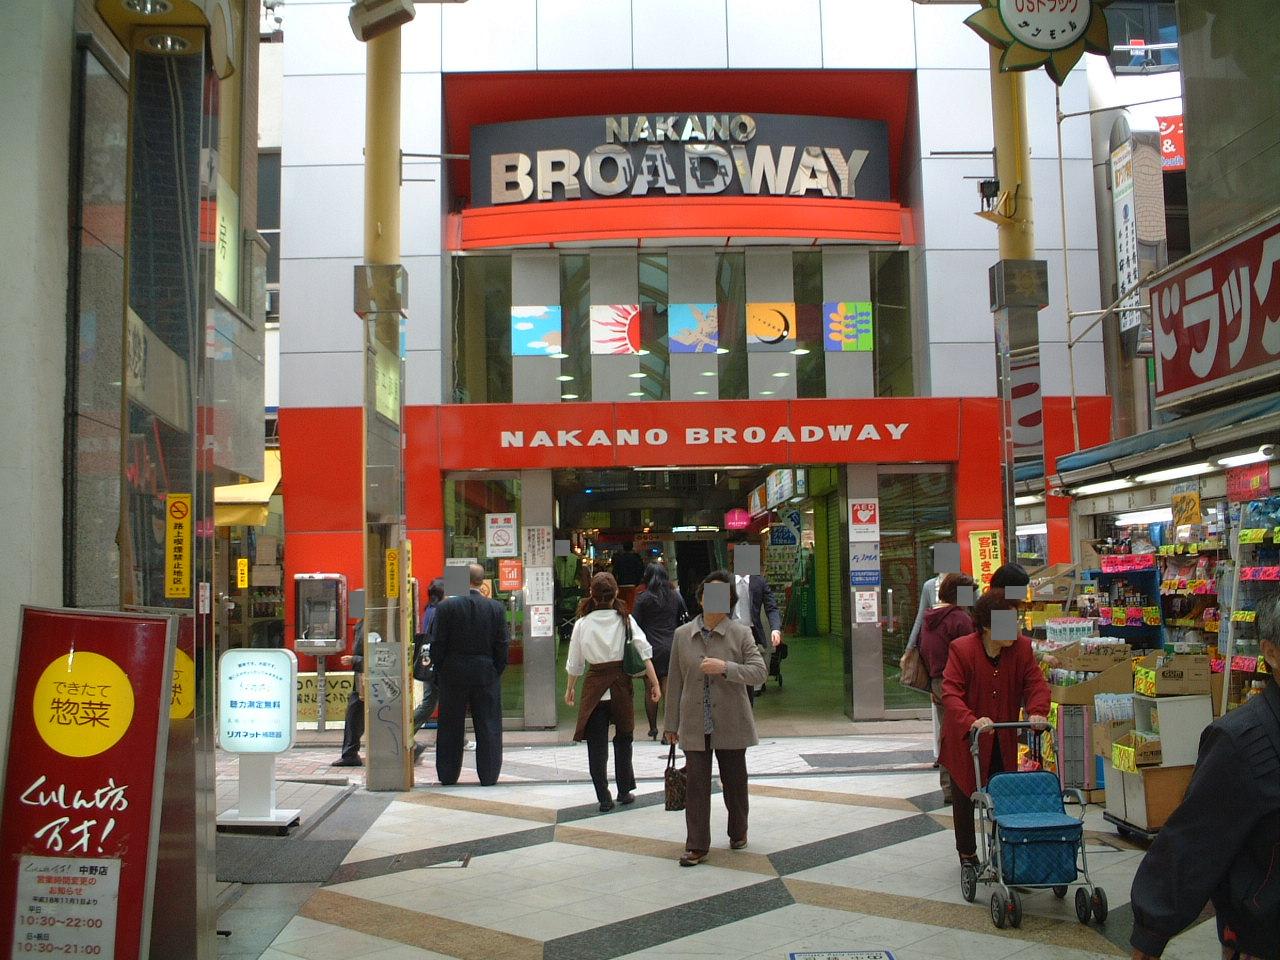 Shopping centre. 520m until Nakano Broadway (shopping center)